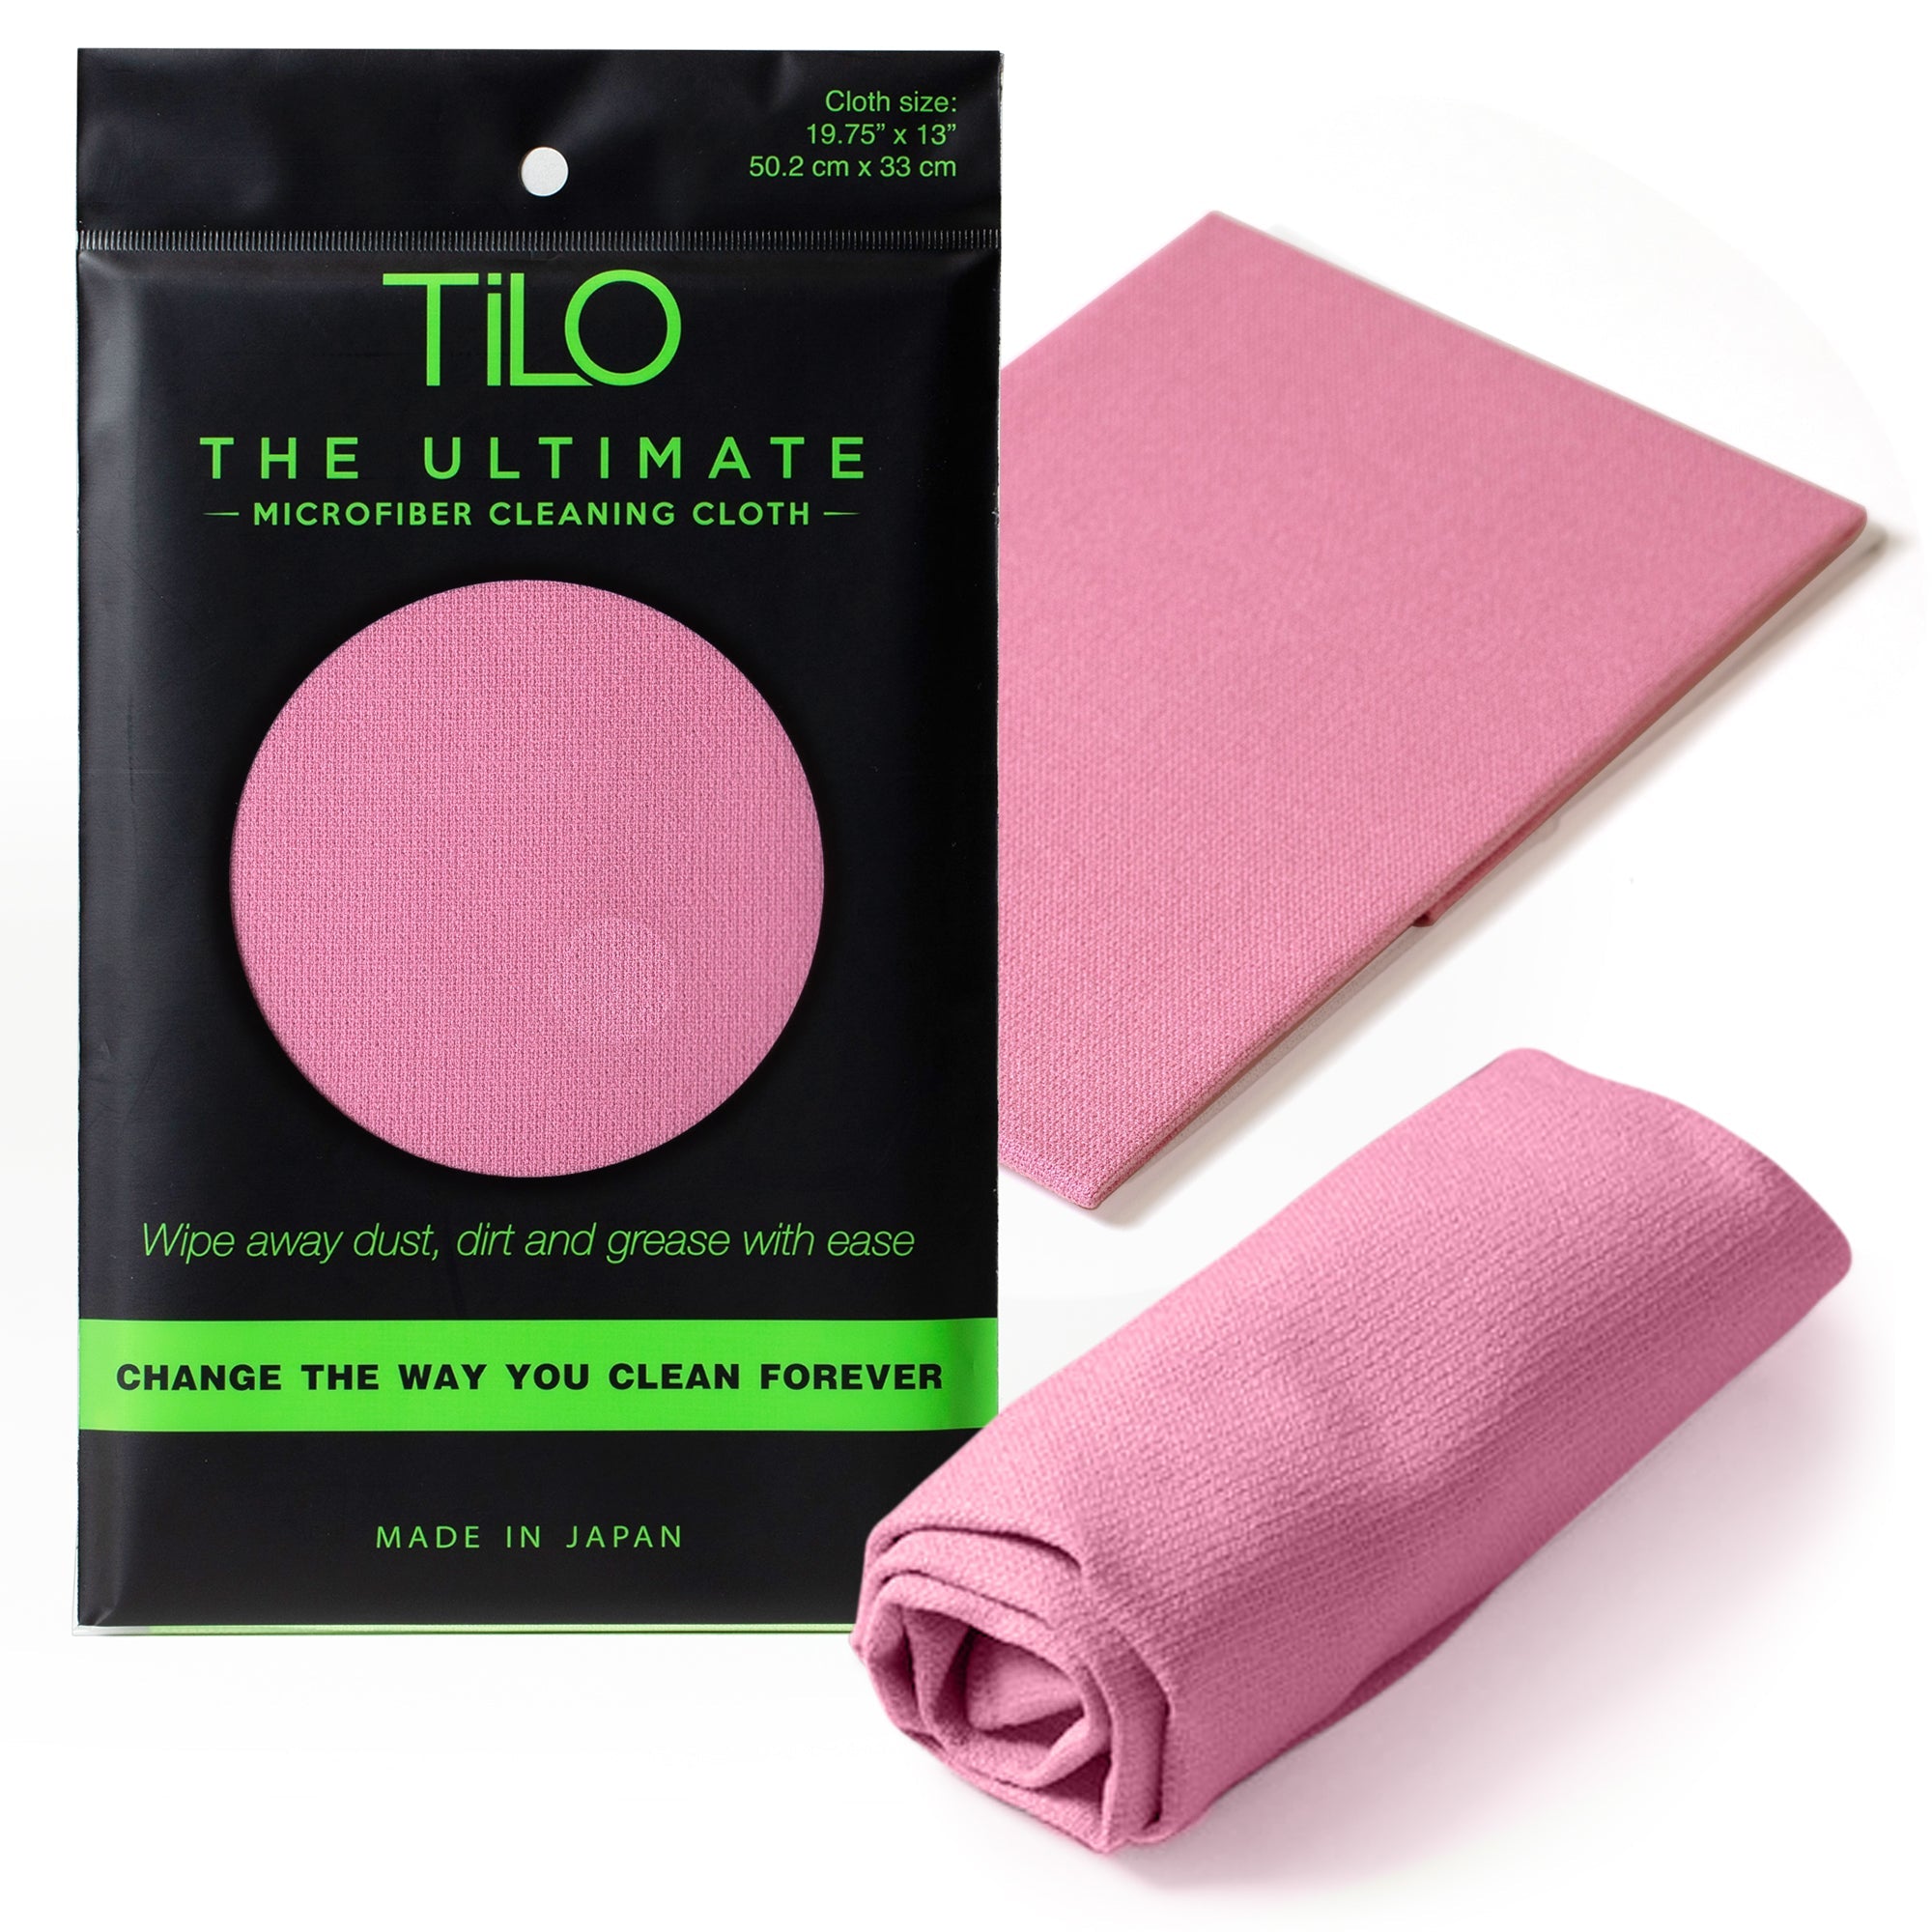 http://tilotheultimate.com/cdn/shop/products/tilo-microfiber-cleaning-cloth-1975-x-13-inch-reusable-pink-977223.jpg?v=1685942221